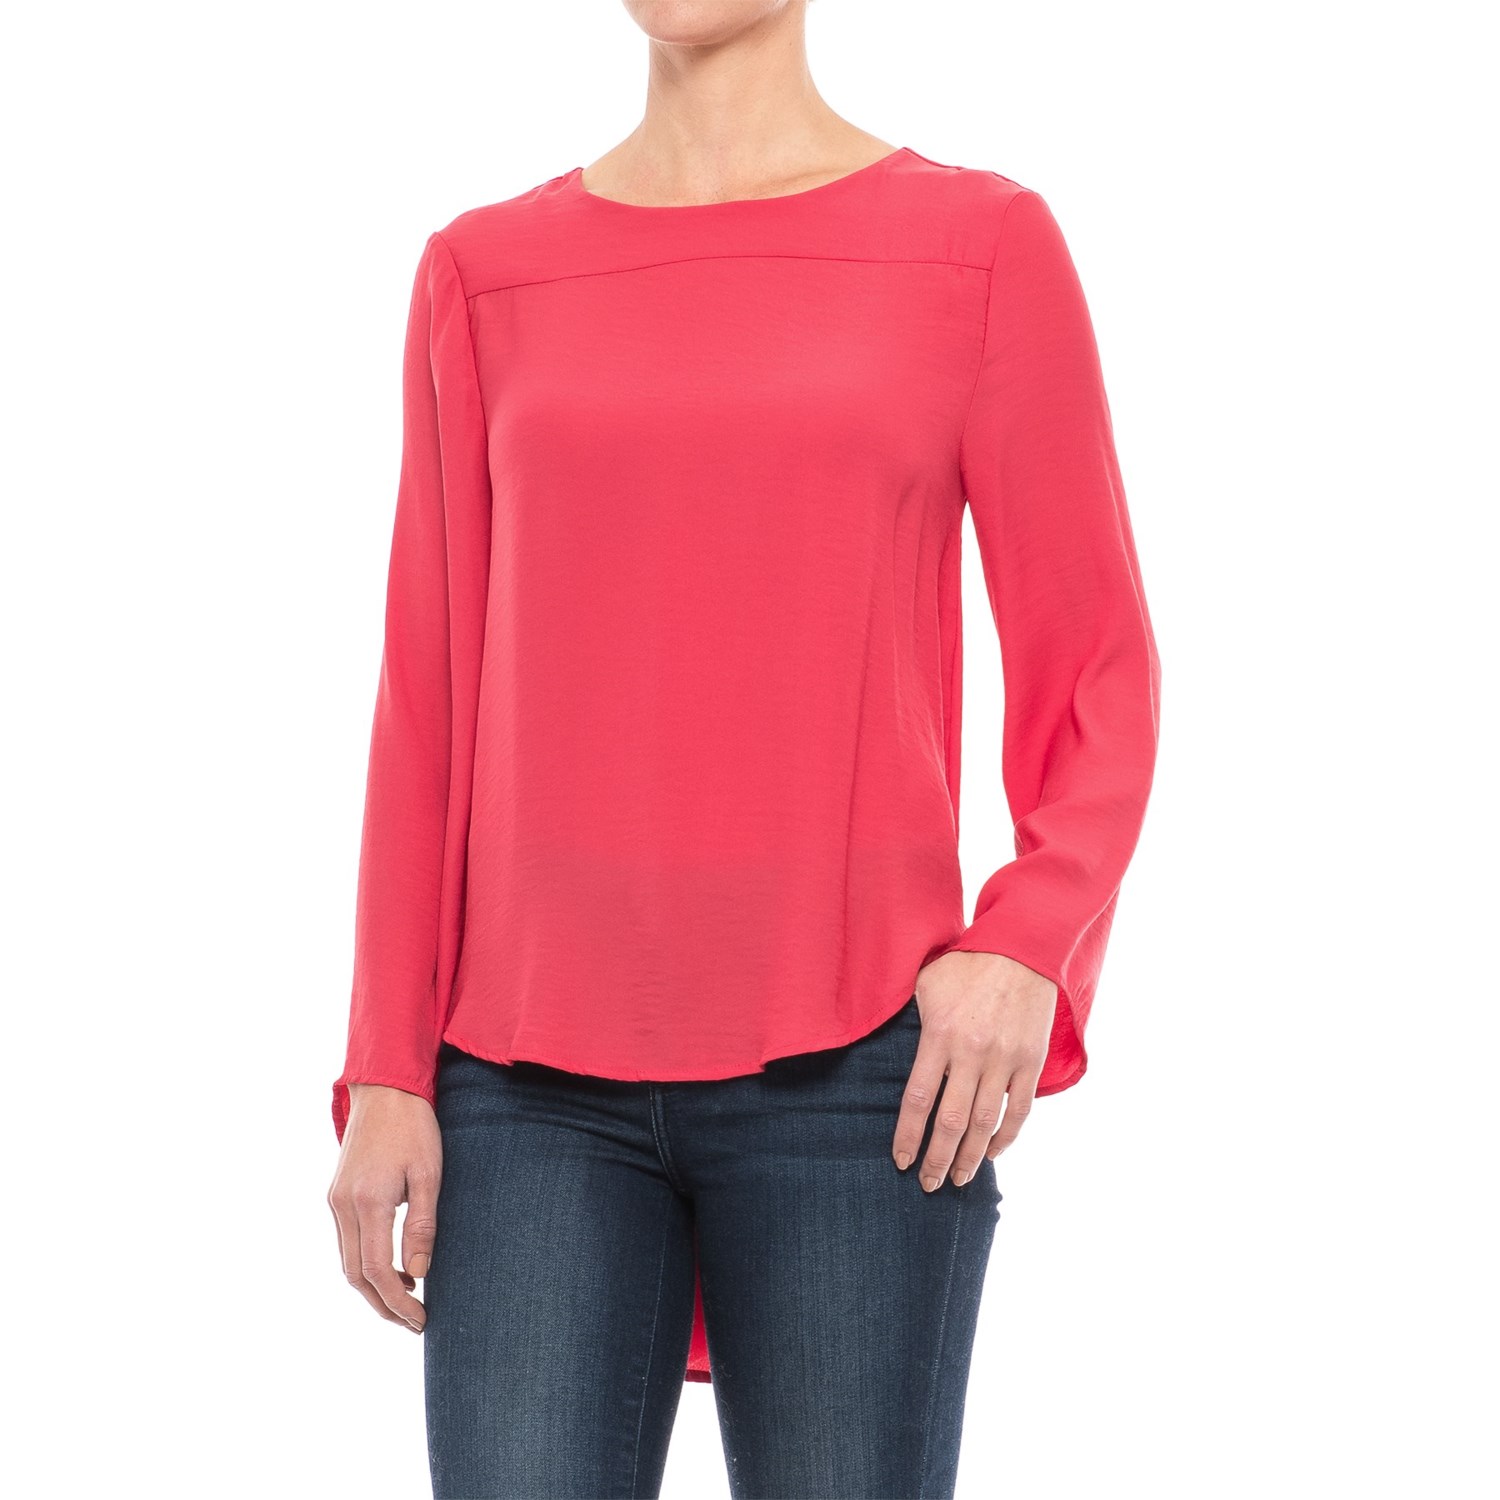 Chelsea & Theodore High-Low Blouse – Open Back, Long Sleeve (For Women)